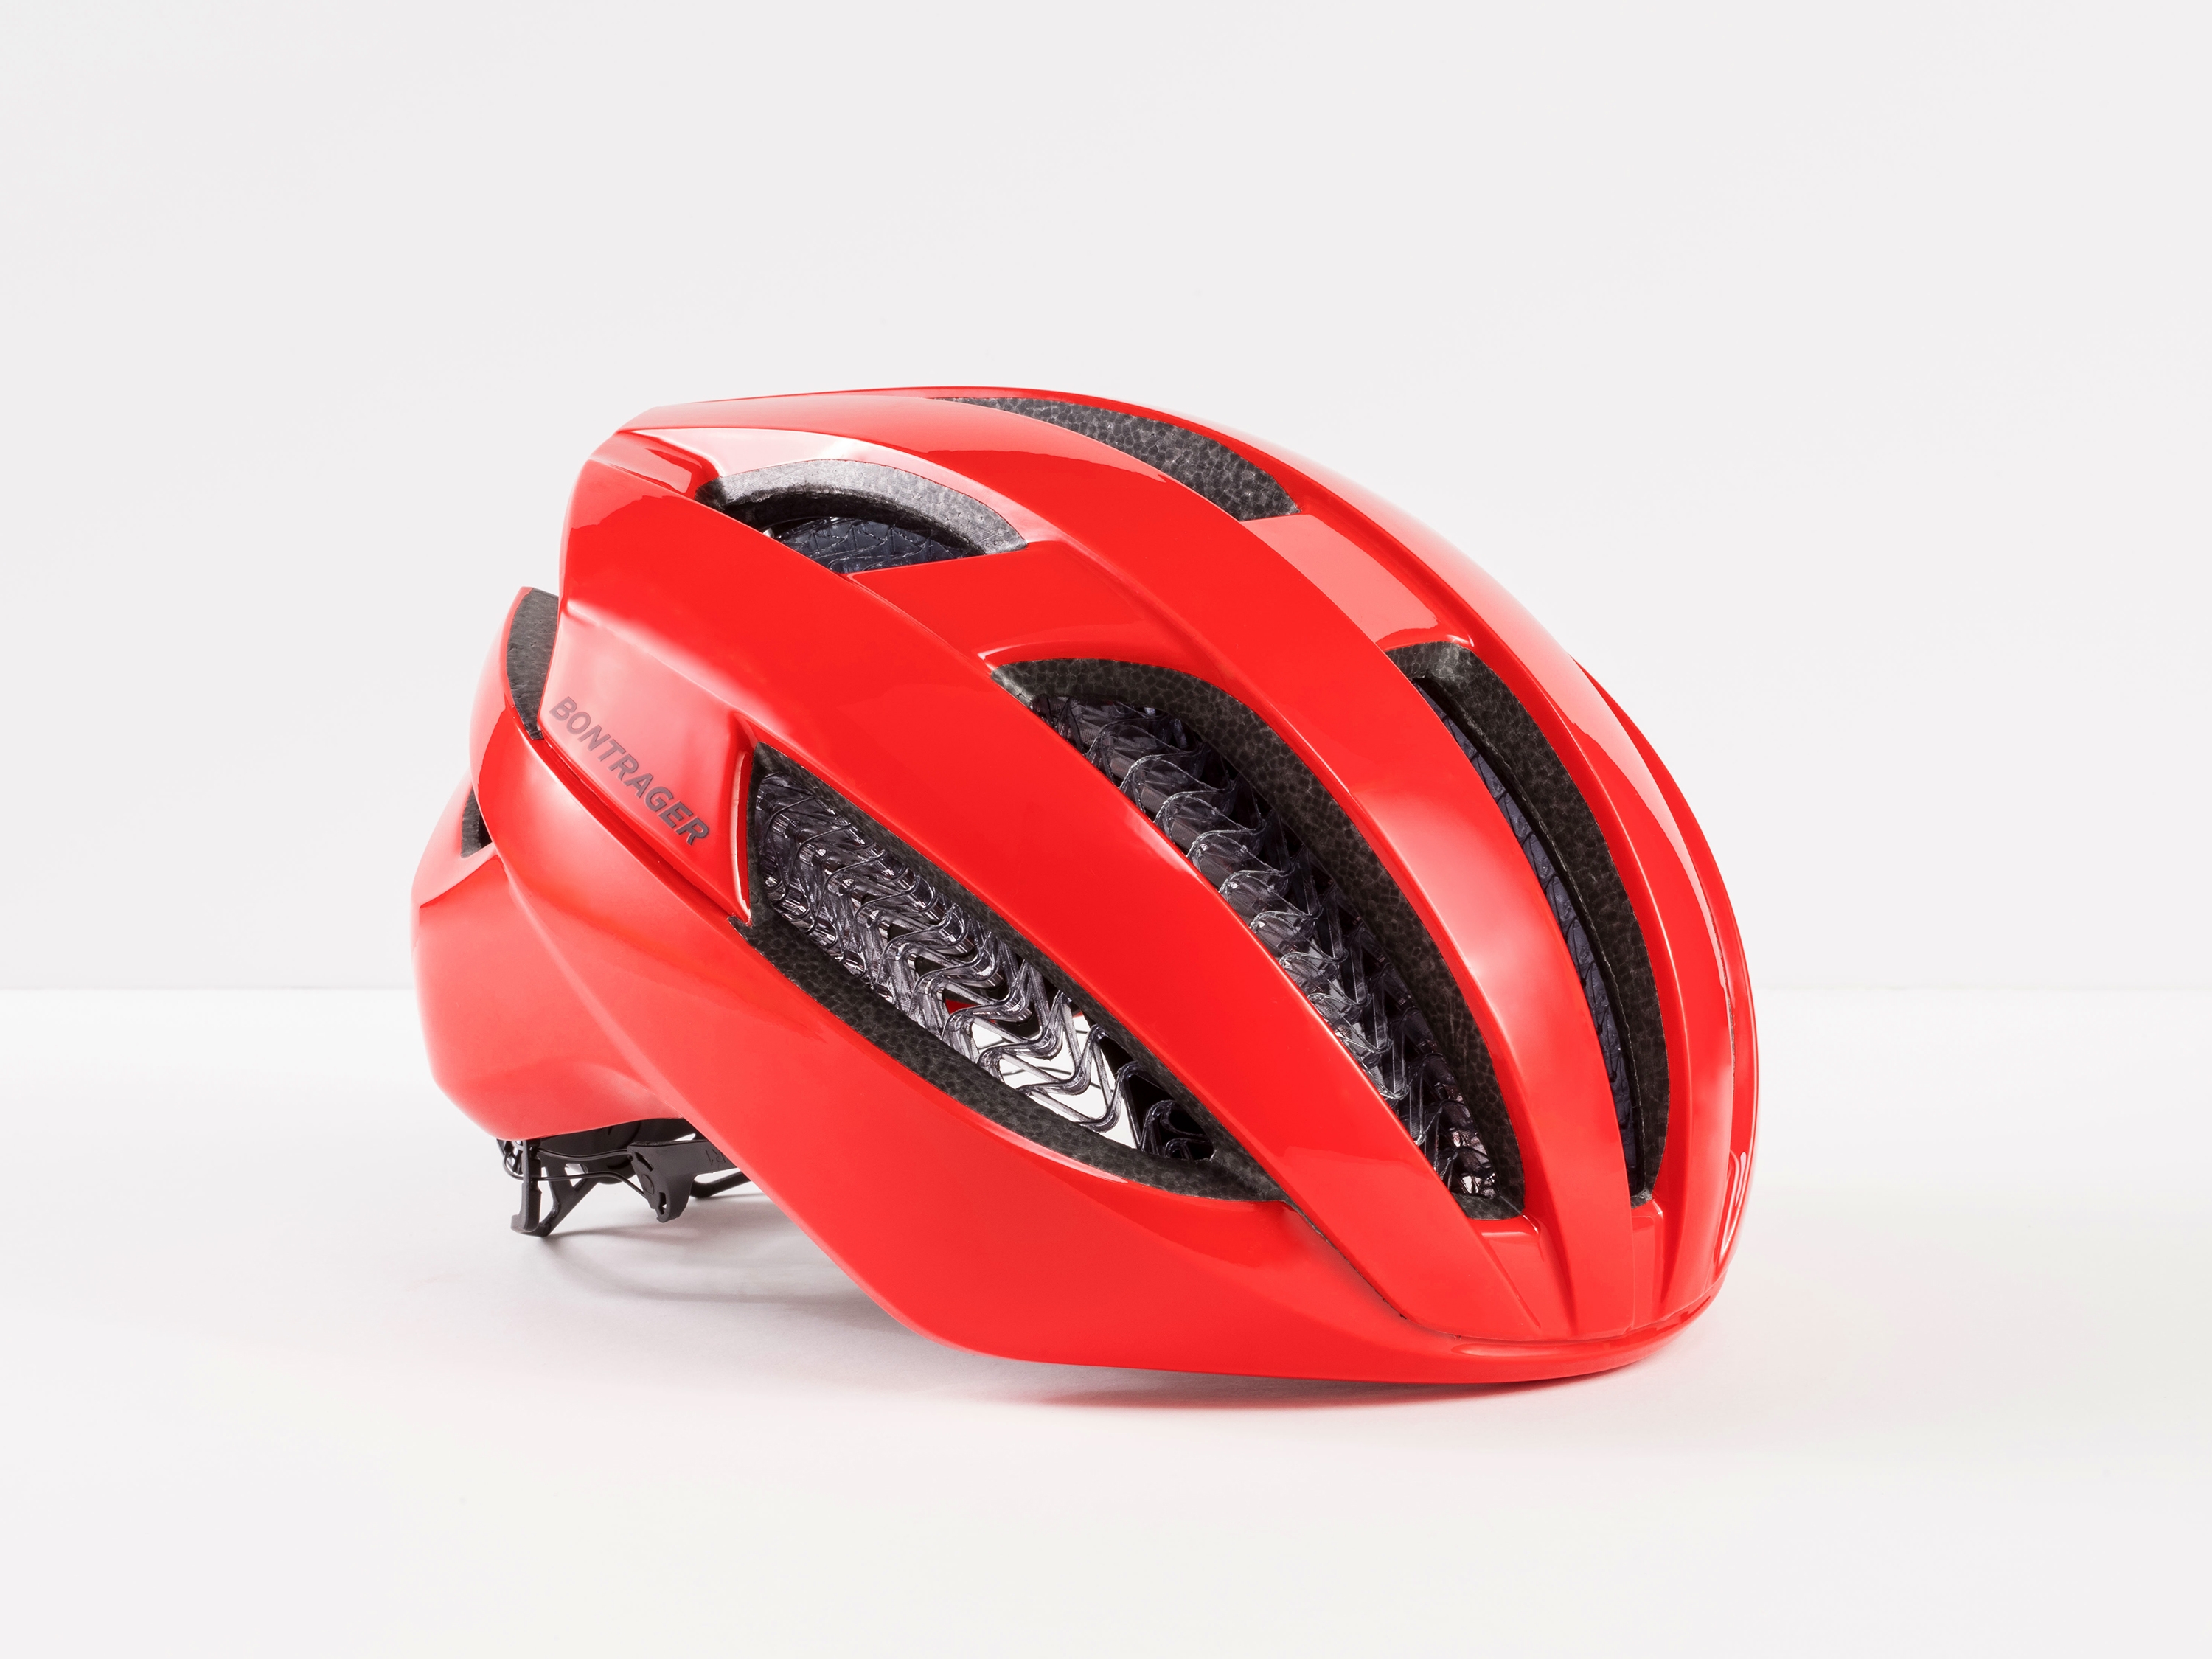 <a href="https://cycles-clement.be/product/casque-bont-specter-wavecel-small-viper-red-ce/">CASQUE BONT SPECTER WAVECEL SMALL VIPER RED CE</a>